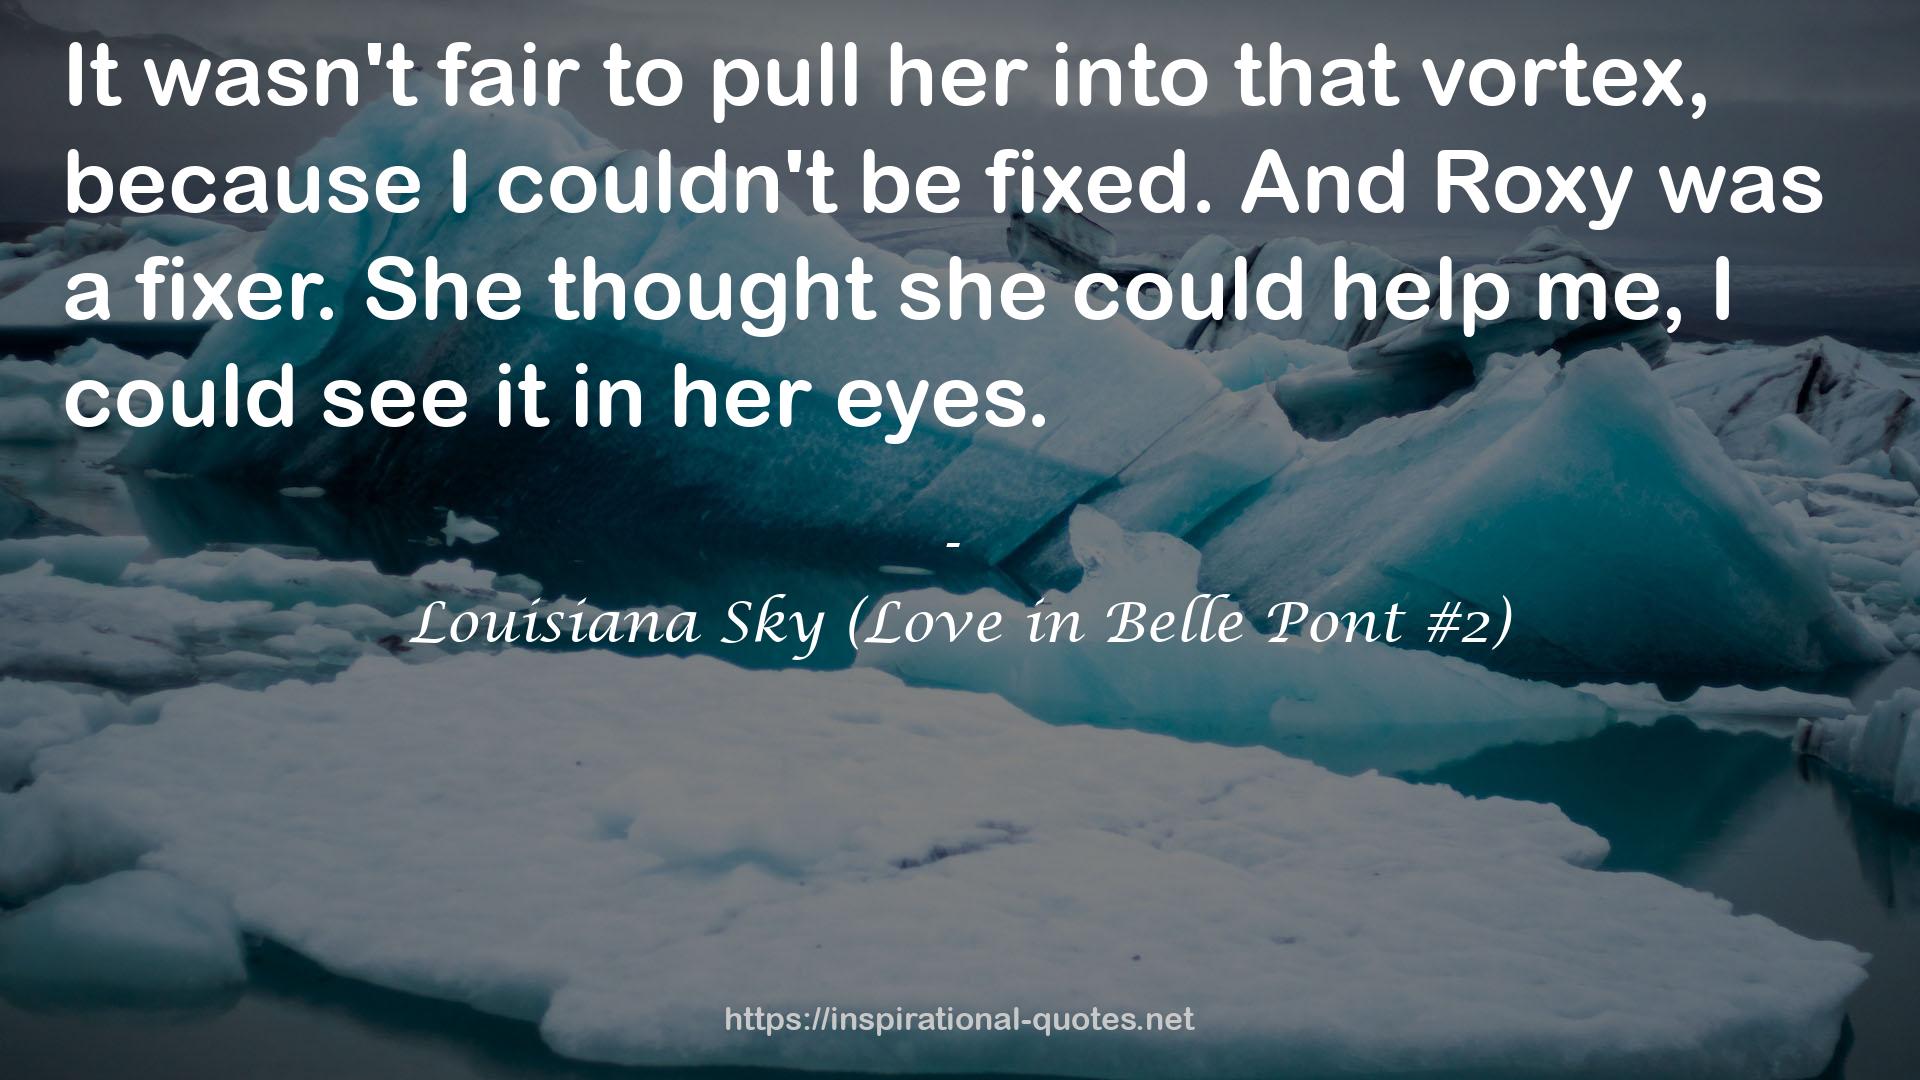 Louisiana Sky (Love in Belle Pont #2) QUOTES